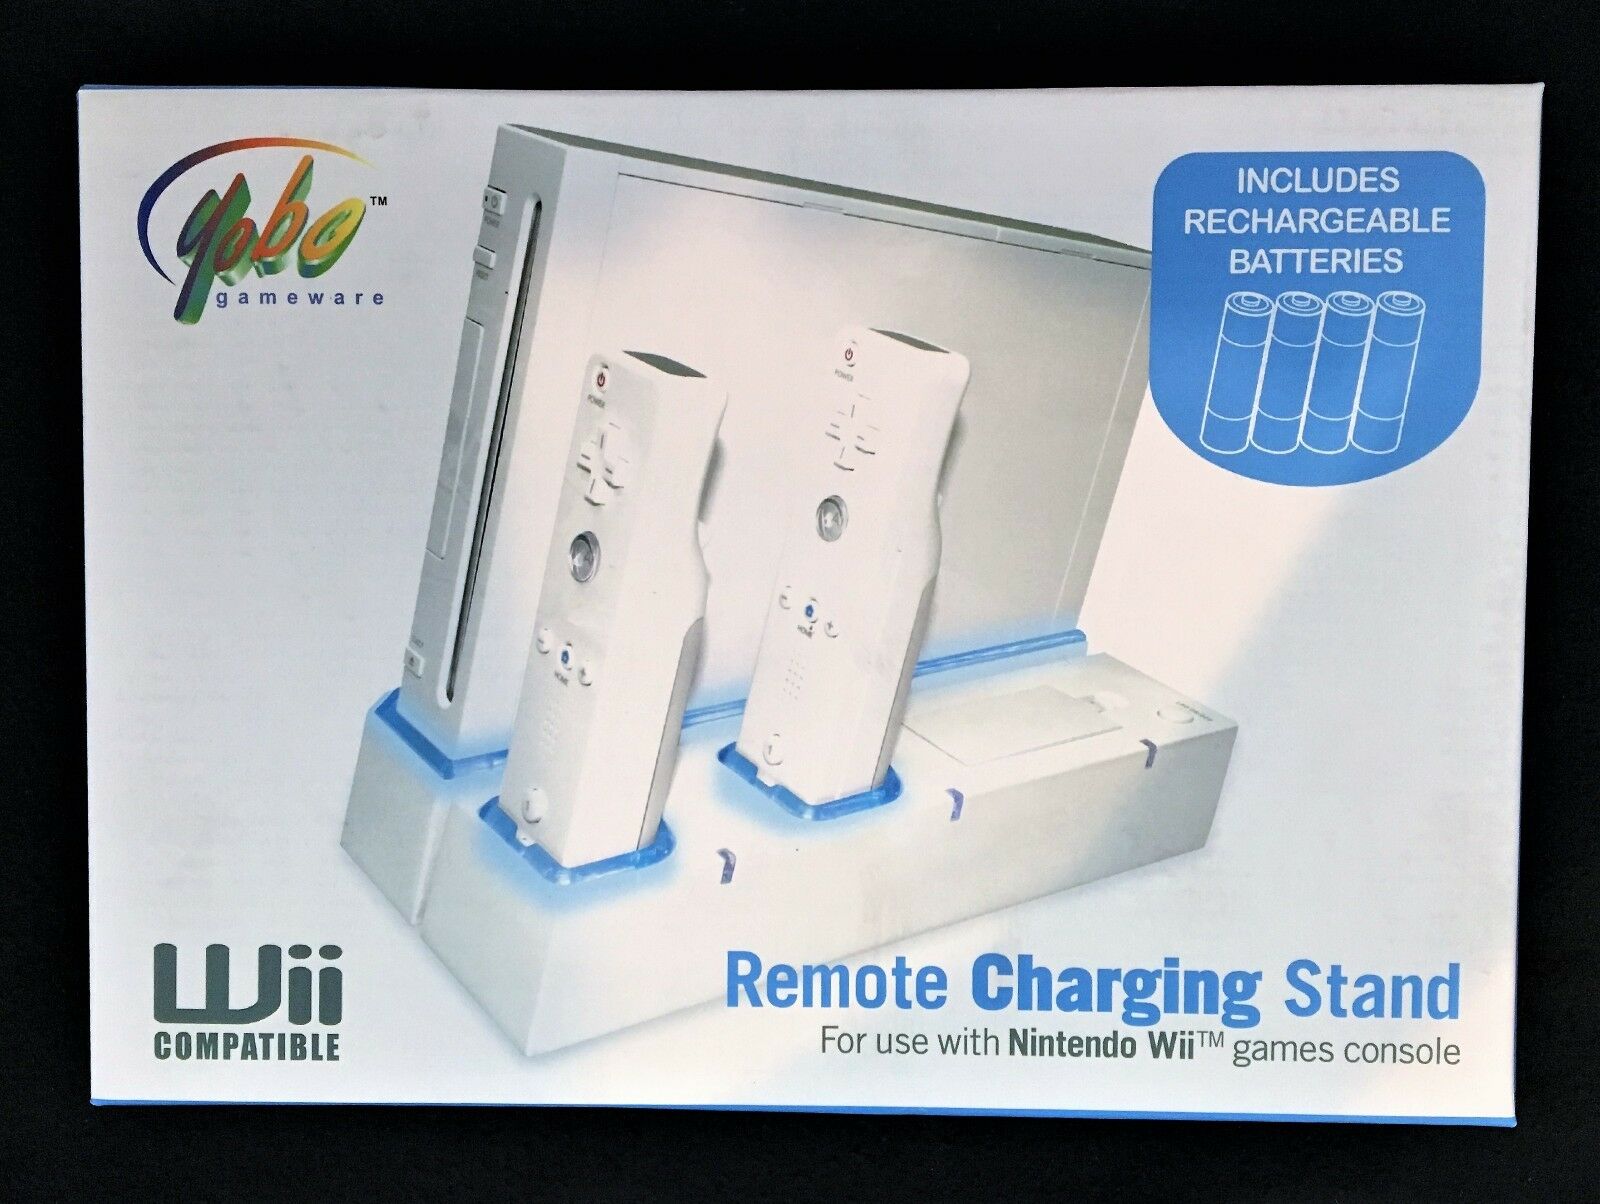 New Remote Charging Stand w/ Rechargeable Batteries (Nintendo Wii)